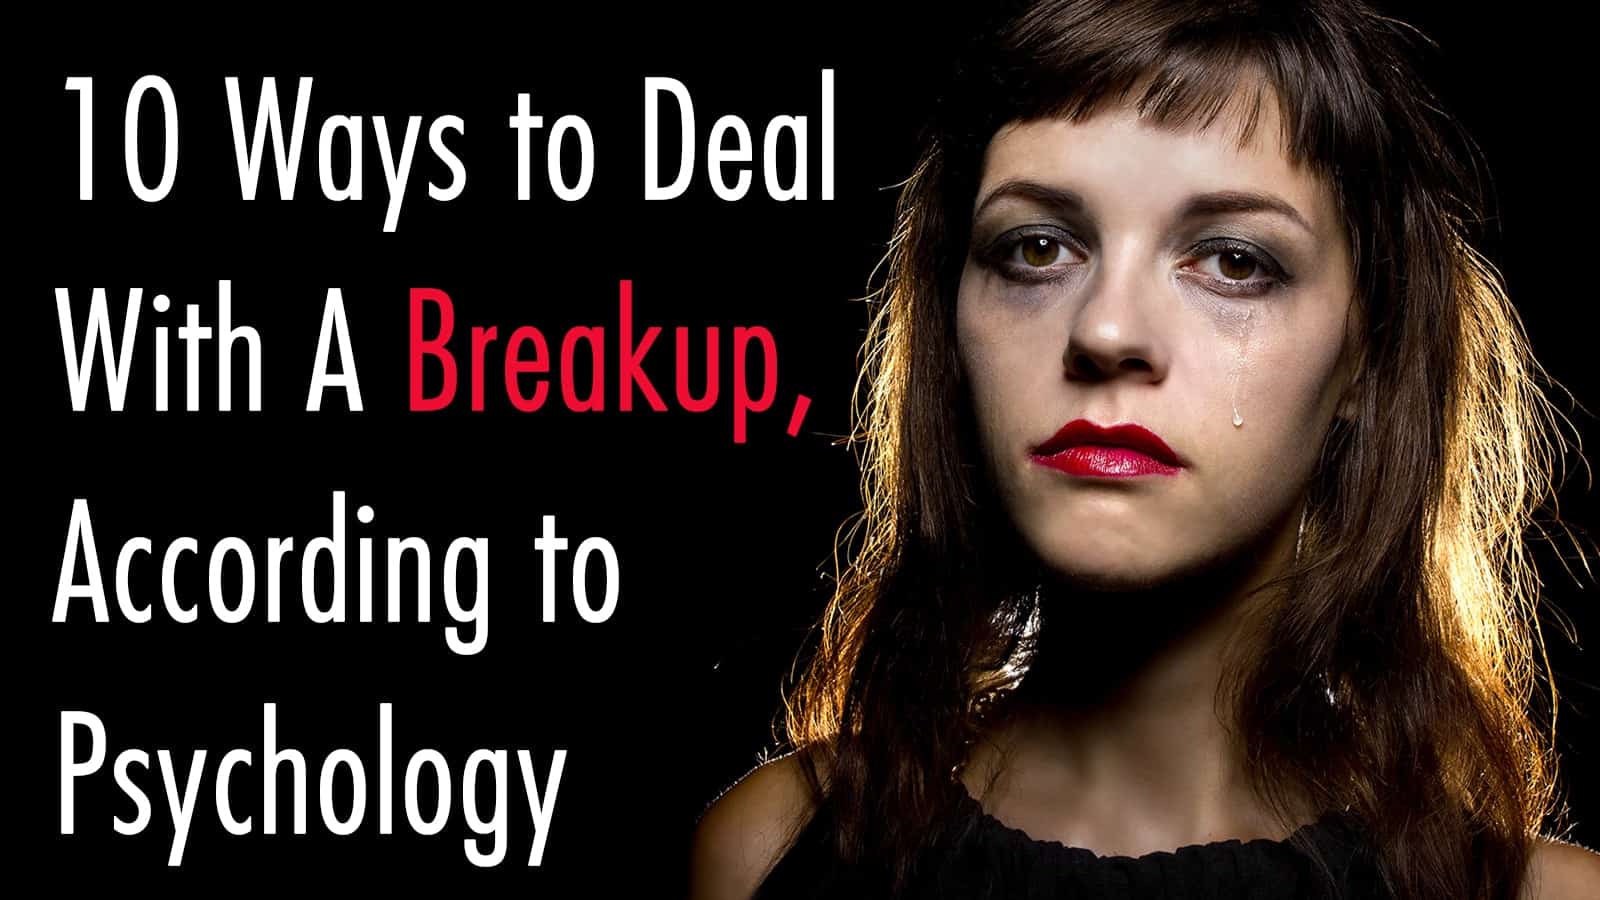 10 Ways to Deal With A Breakup, According to Psychology